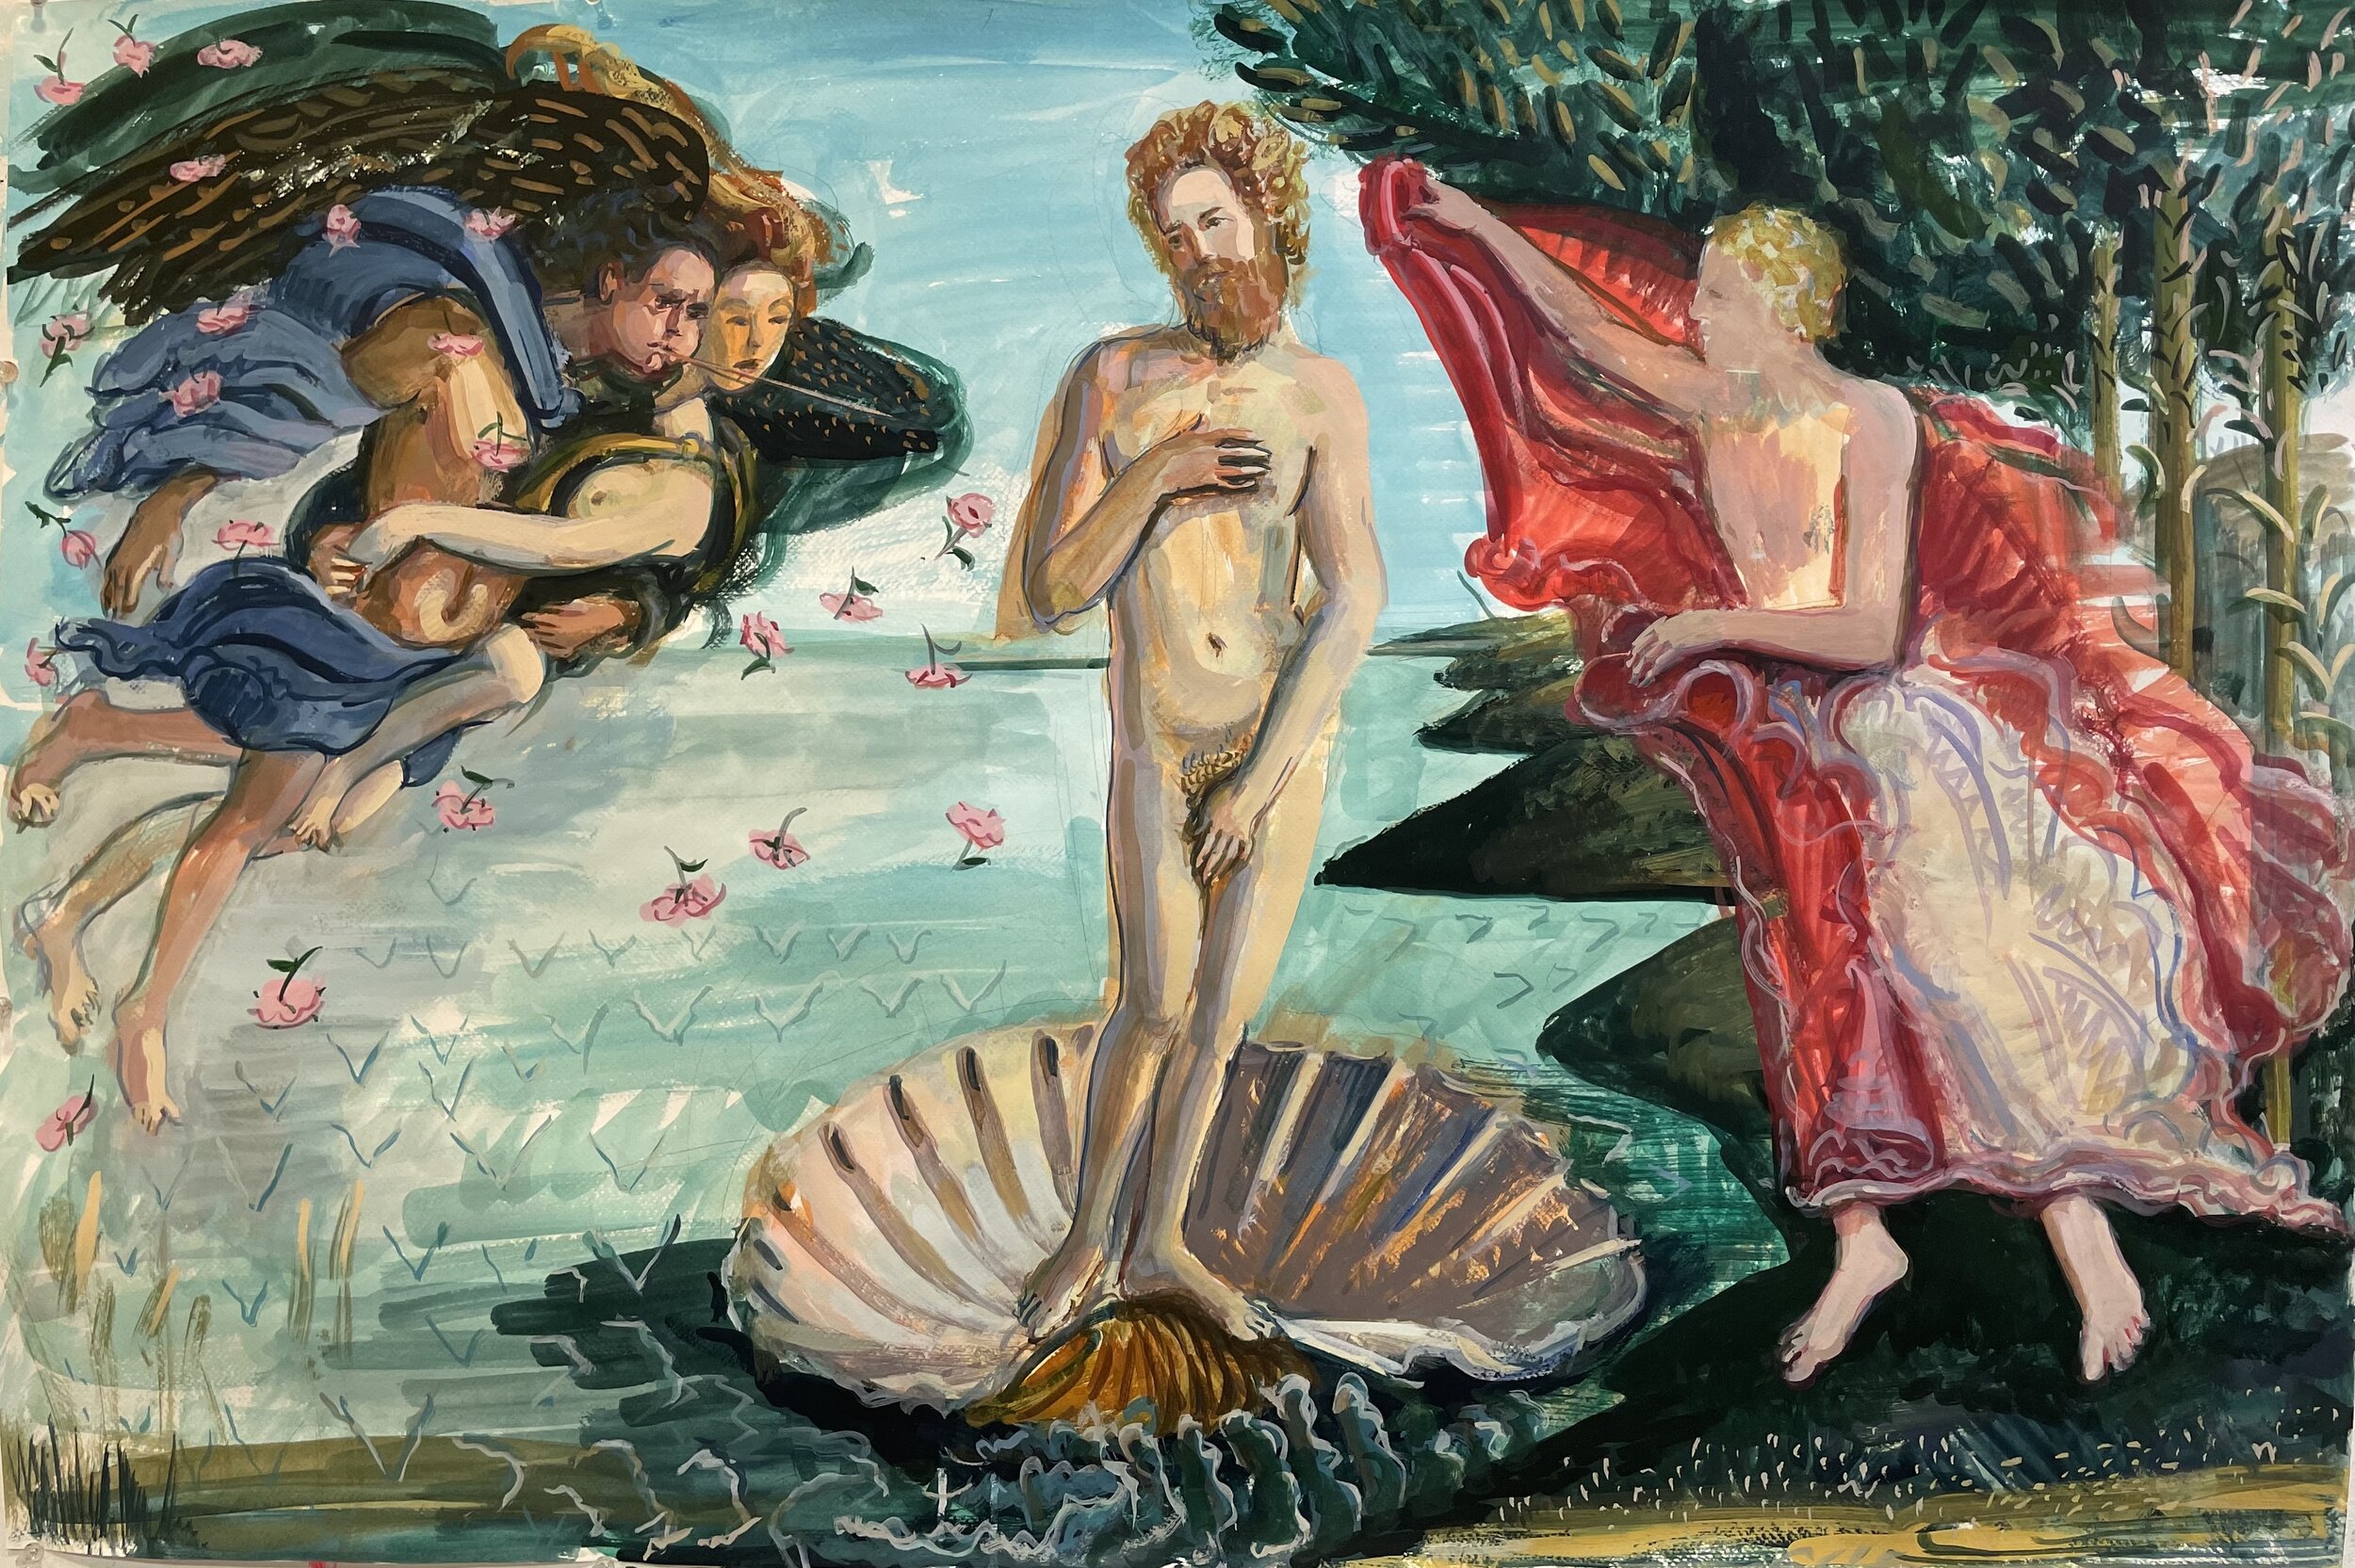 A painting depicting a biblical Adam-figure emerging from a large seashell. He is surrounded by three other etheral figures. The background is a whimsical nature scene.